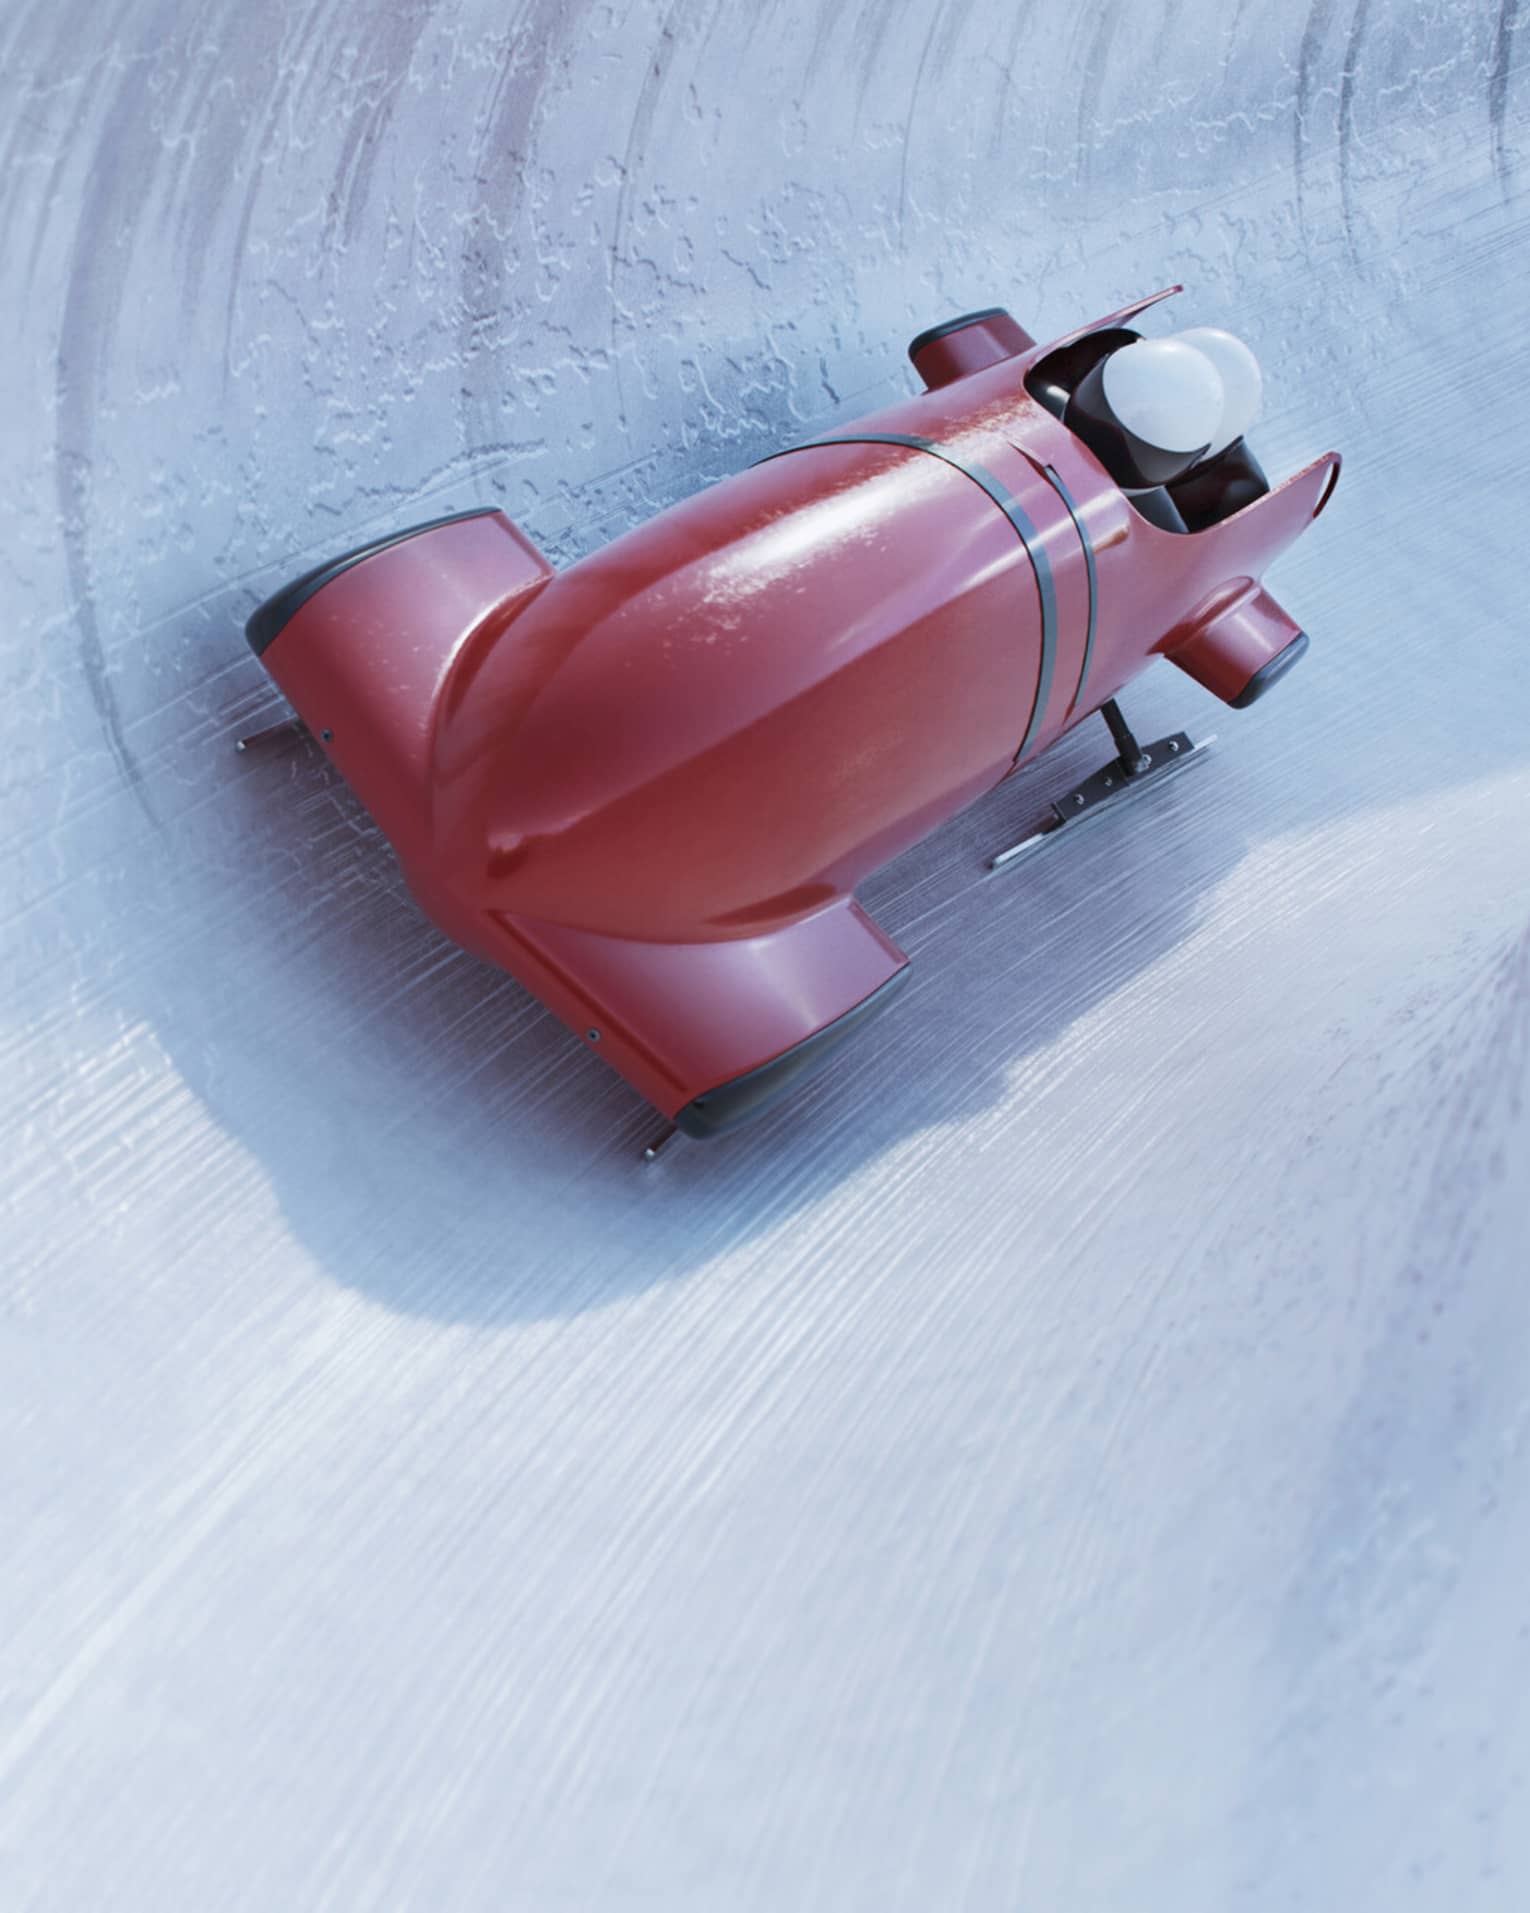 Front view of a bobsleigh zipping around a corner on a concave icy track, the helmets of two riders visible from the cockpit.